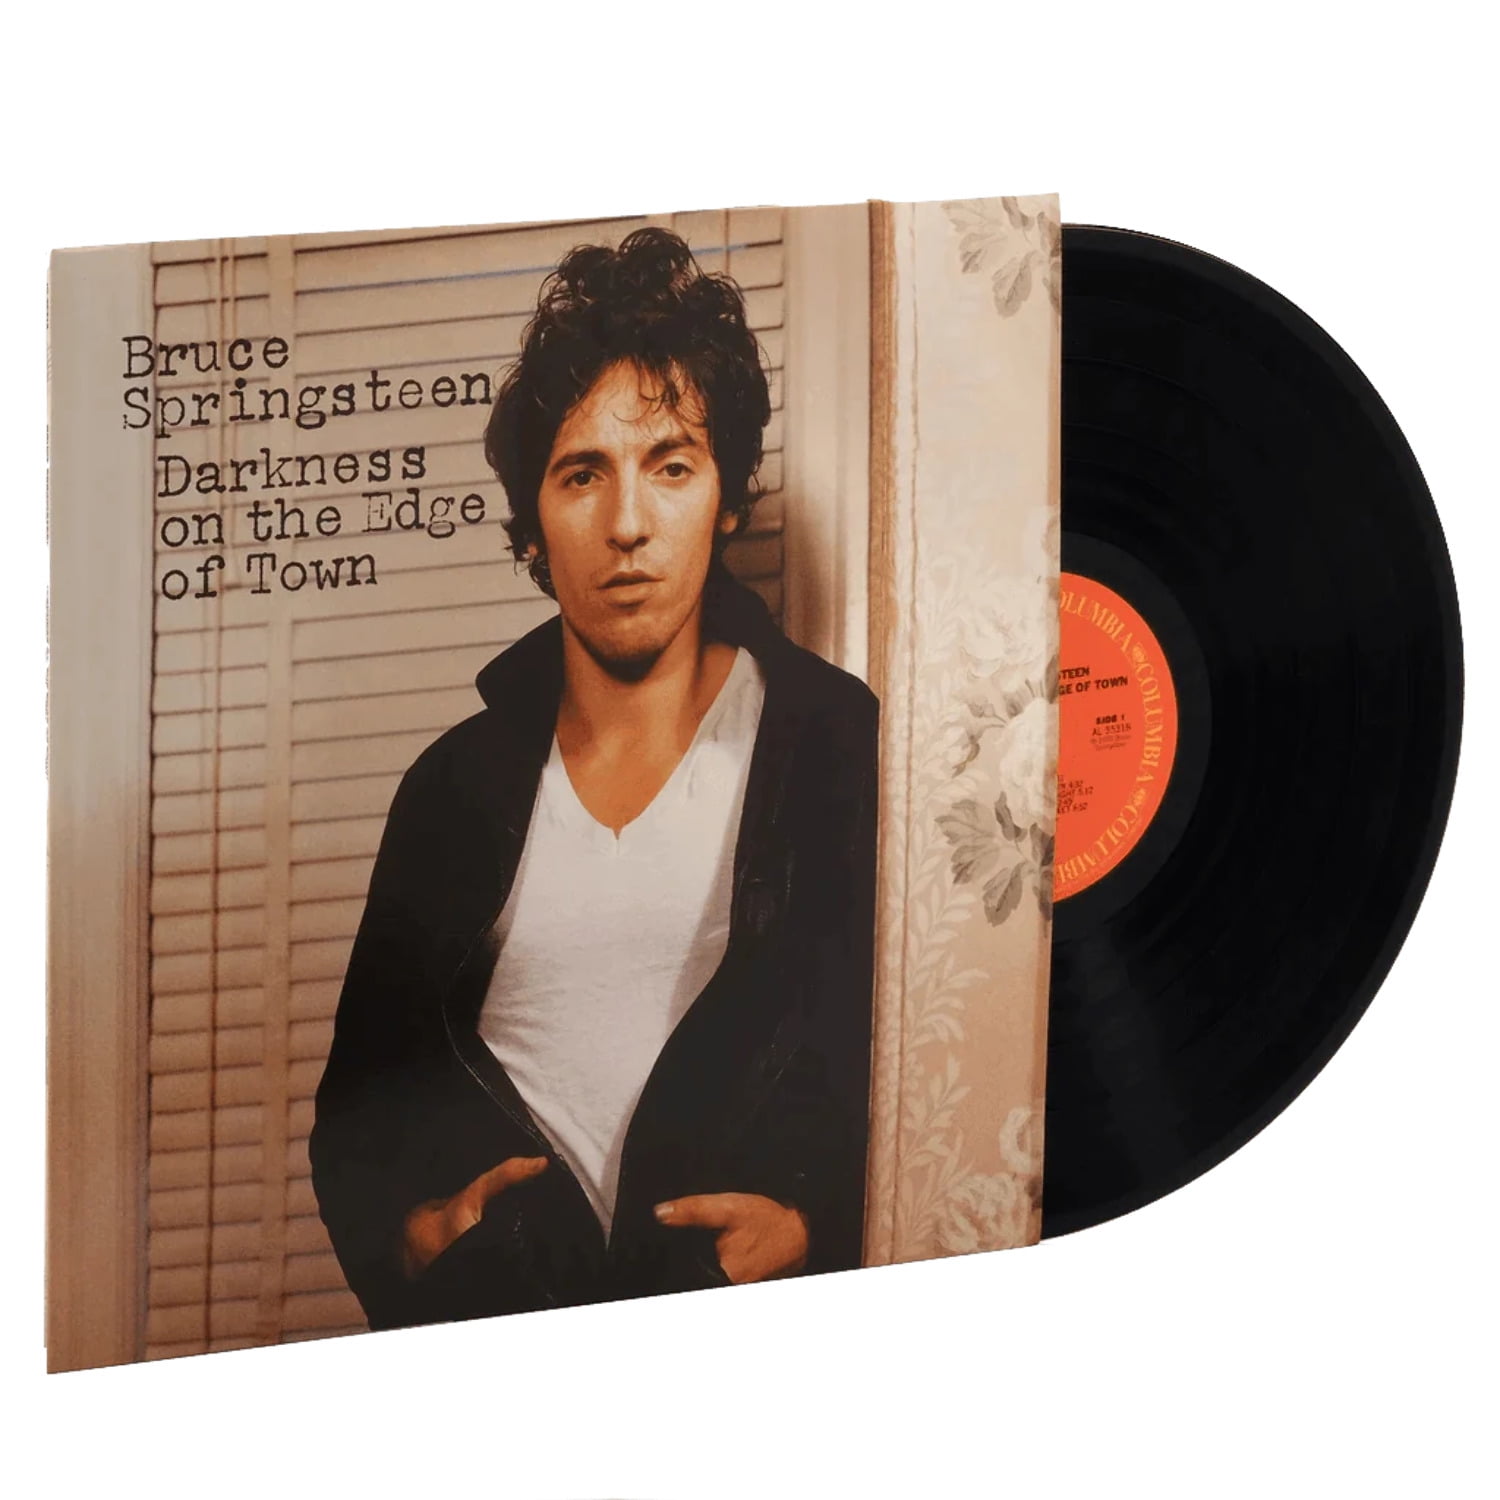 Bruce Springsteen - Darkness on the Edge of Town - Rock - Vinyl 